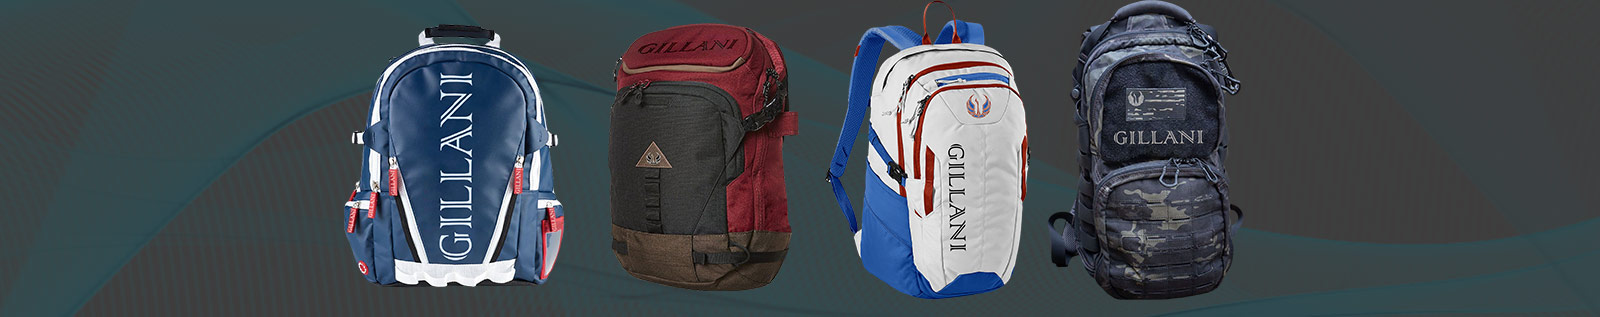 Explore Durable and Functional Backpacks for Hikers and Students!